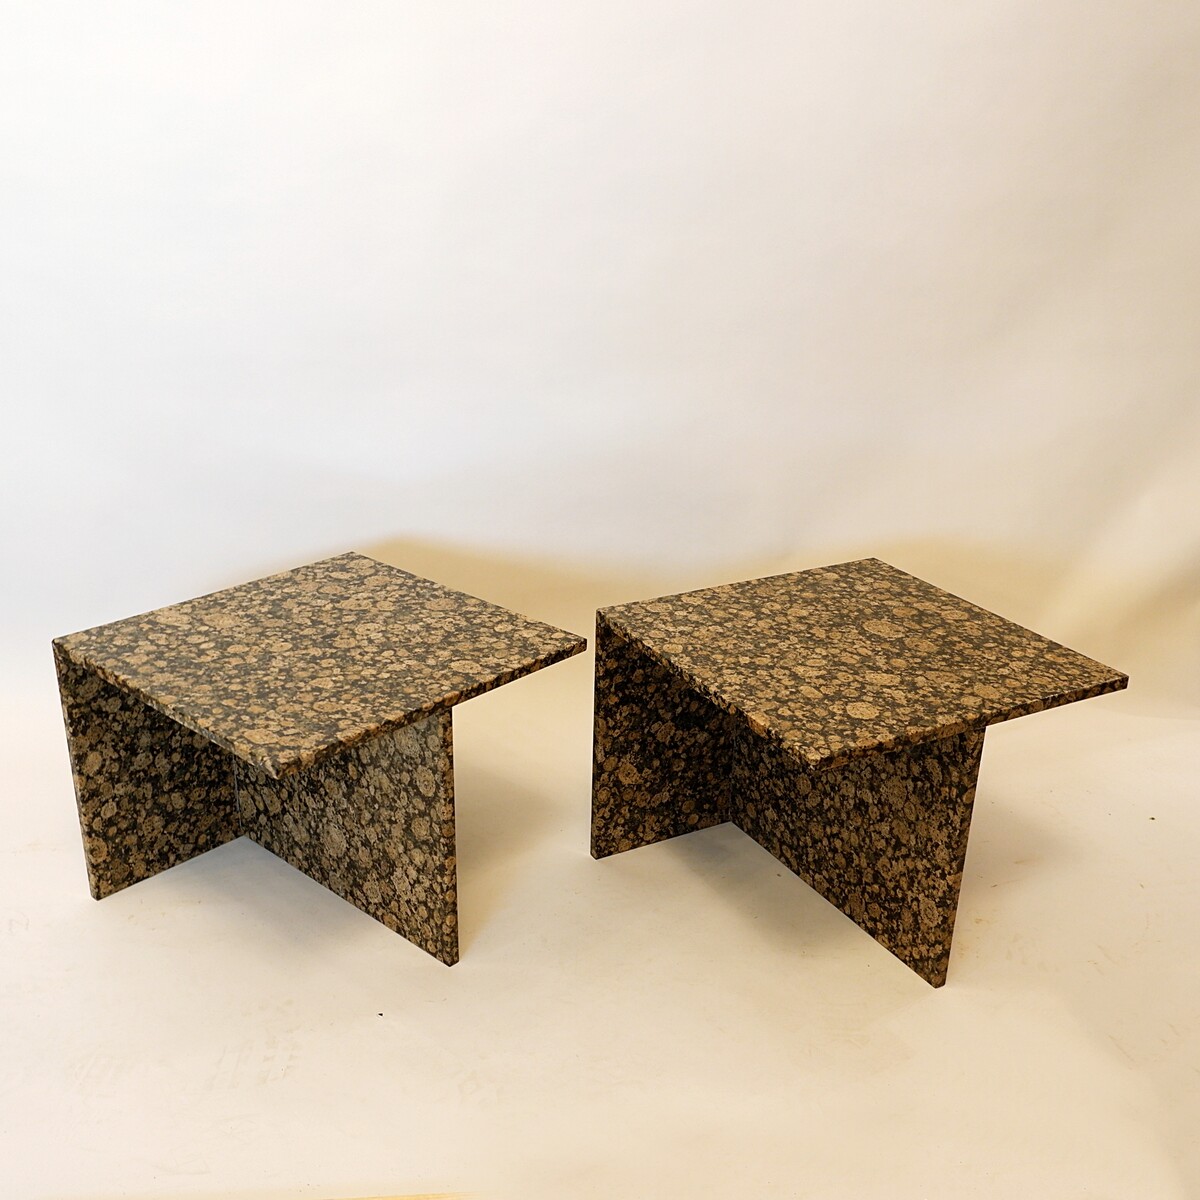 Pair of end tables or coffee table(s) - 